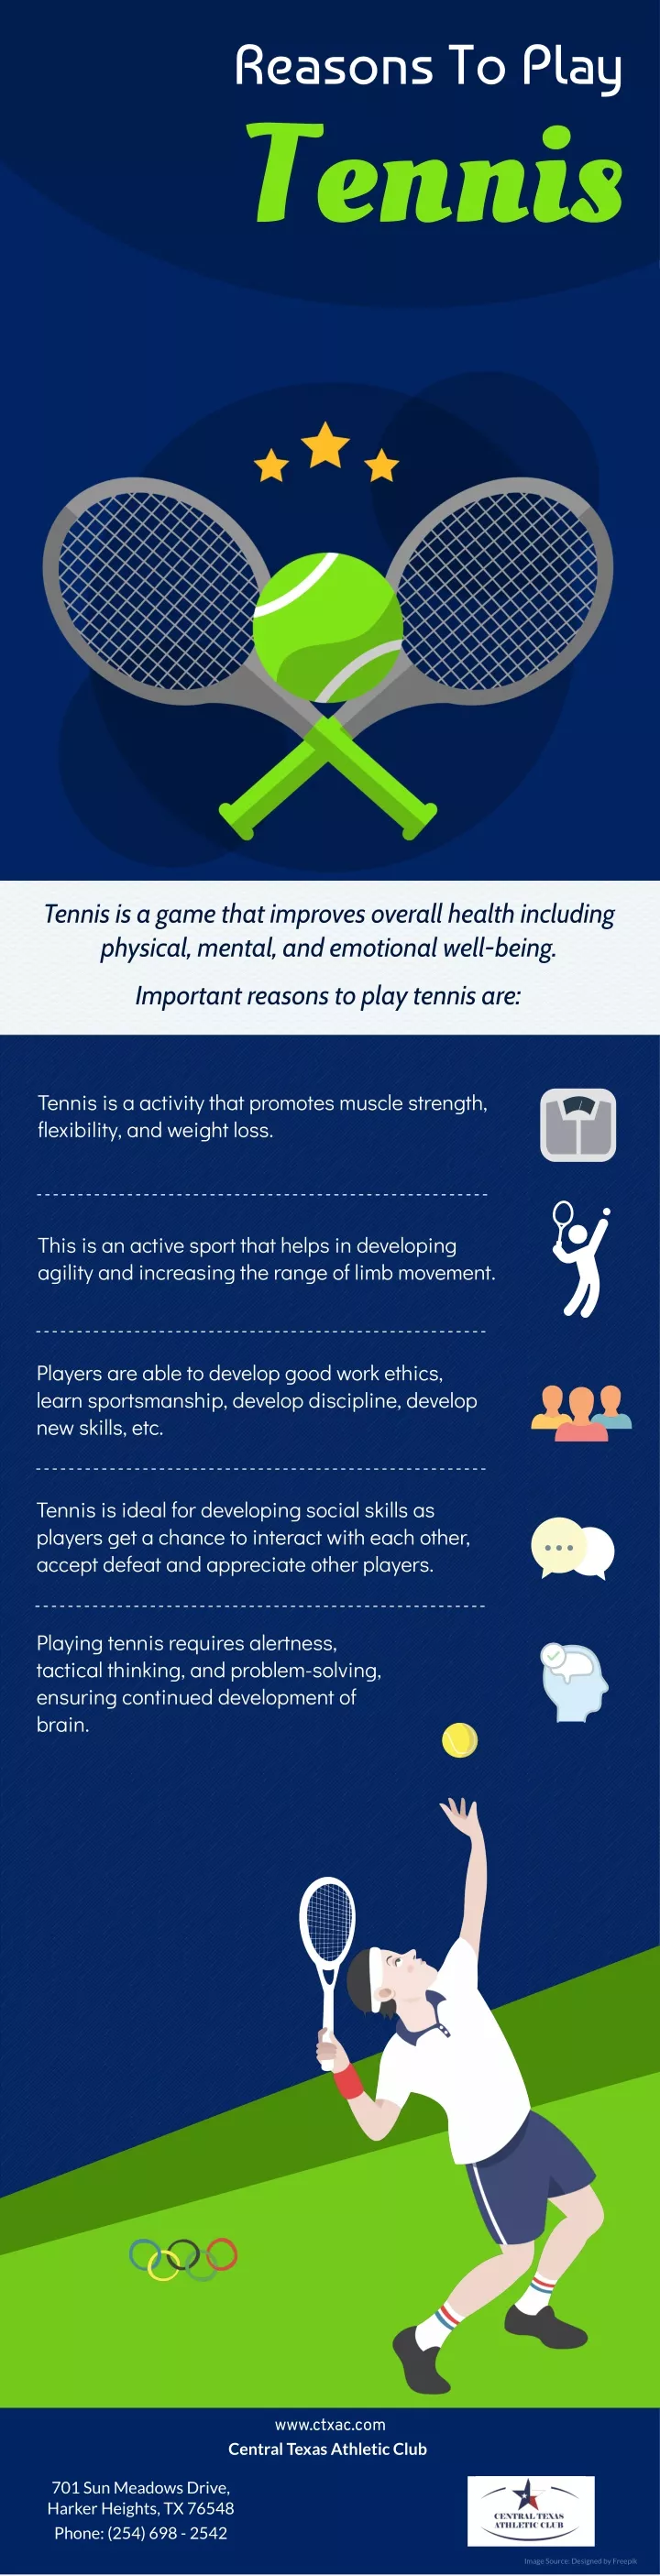 reasons to play tennis